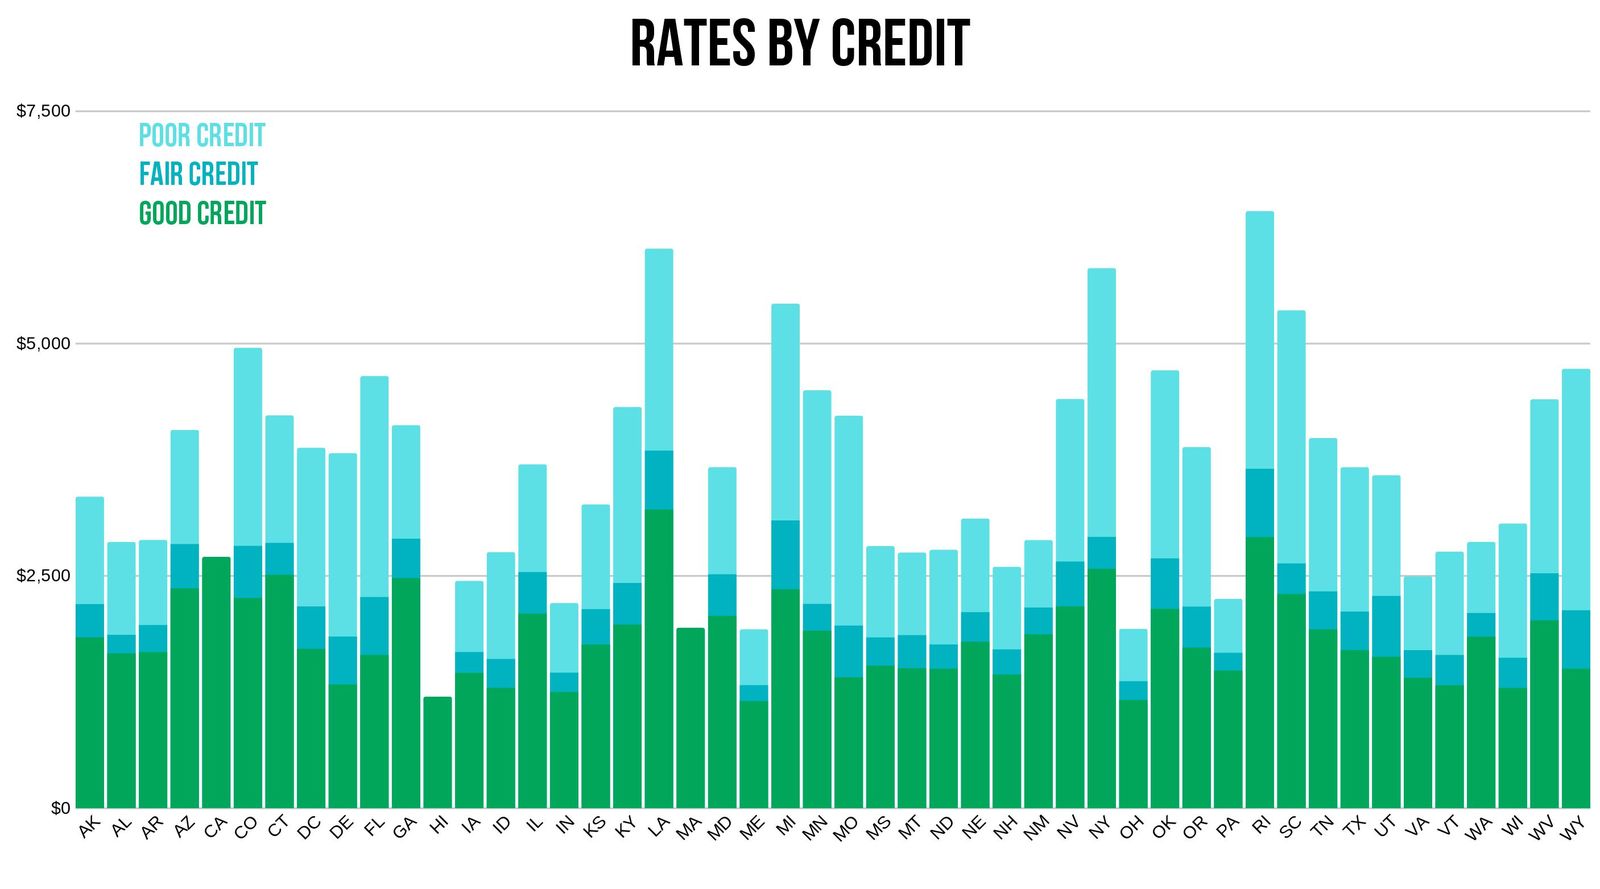 USAA rates depending on credit rating